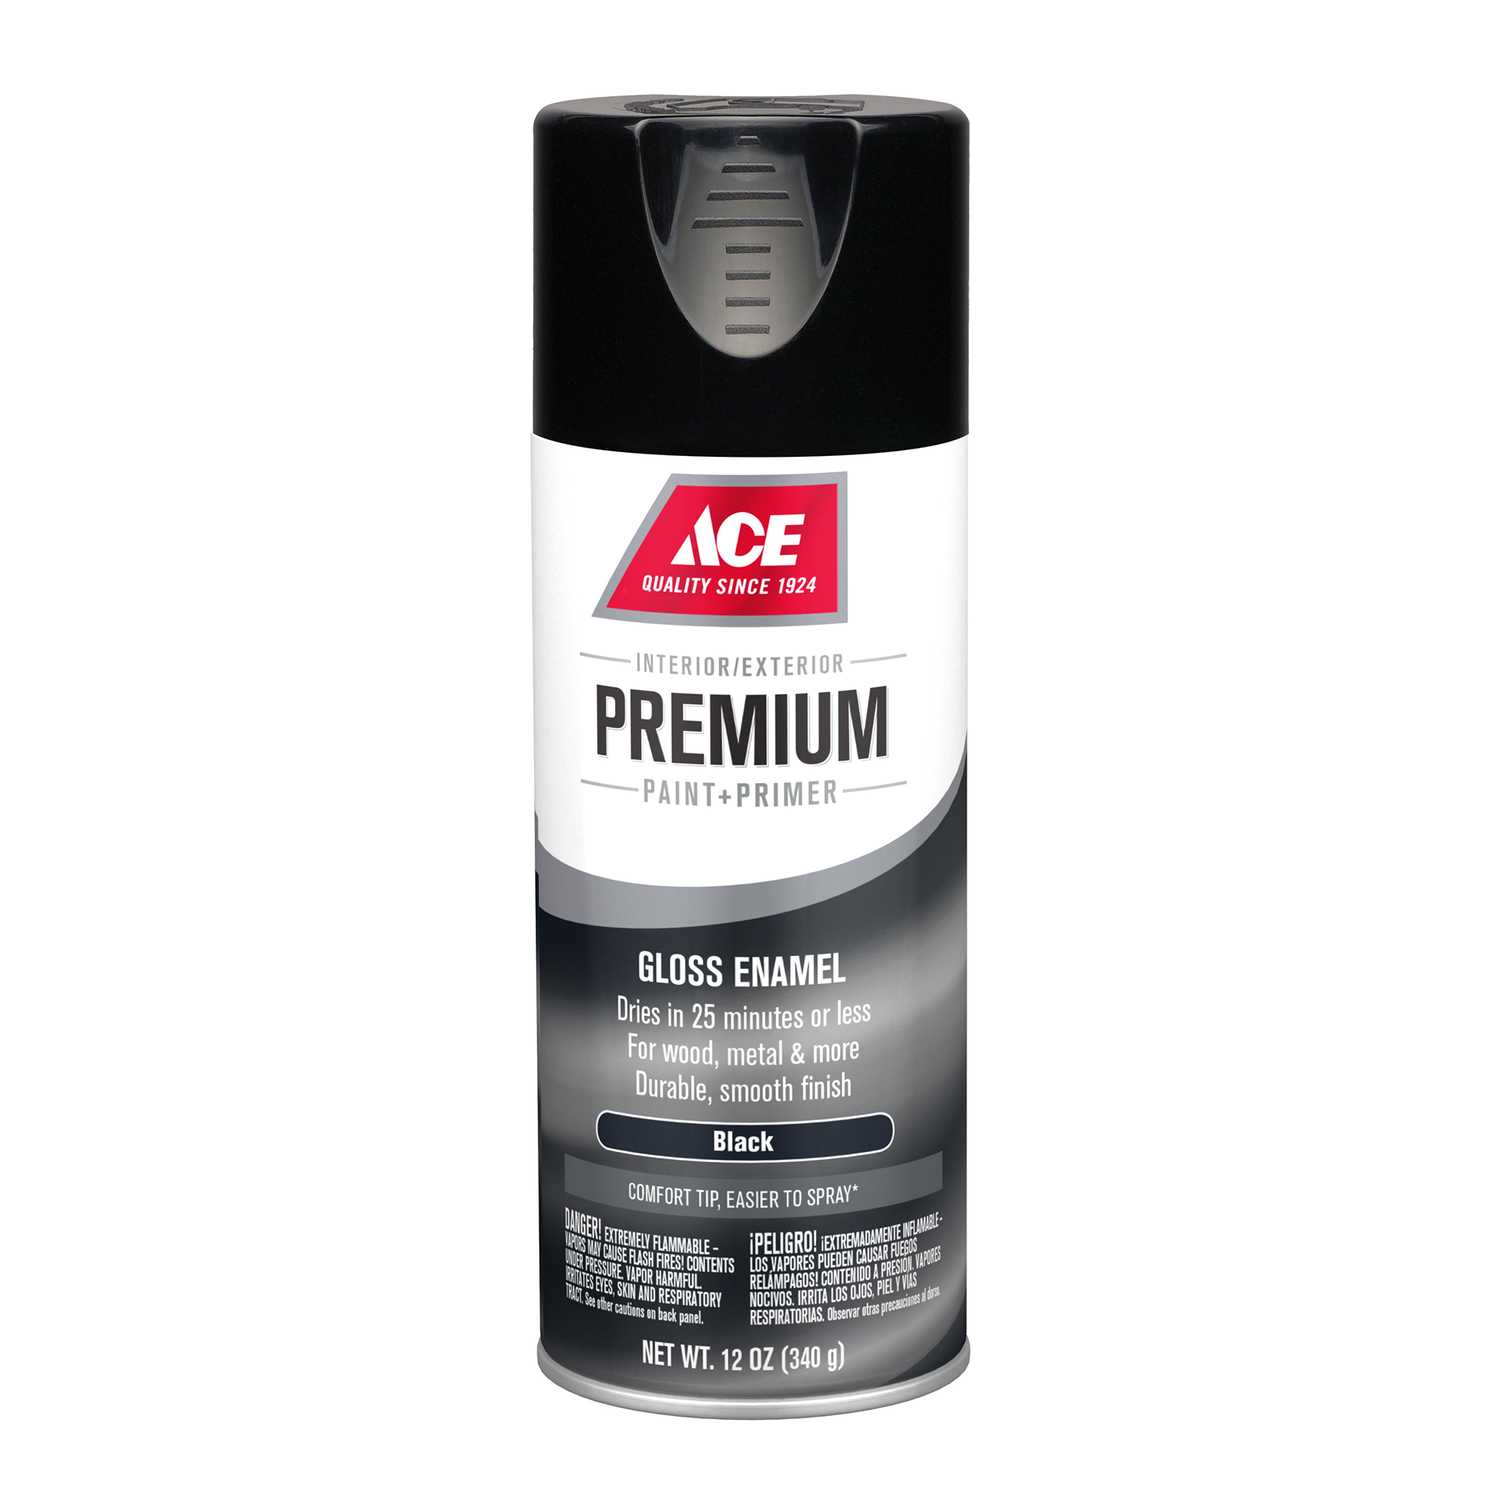 Paint And Painting Supplies At Ace Hardware